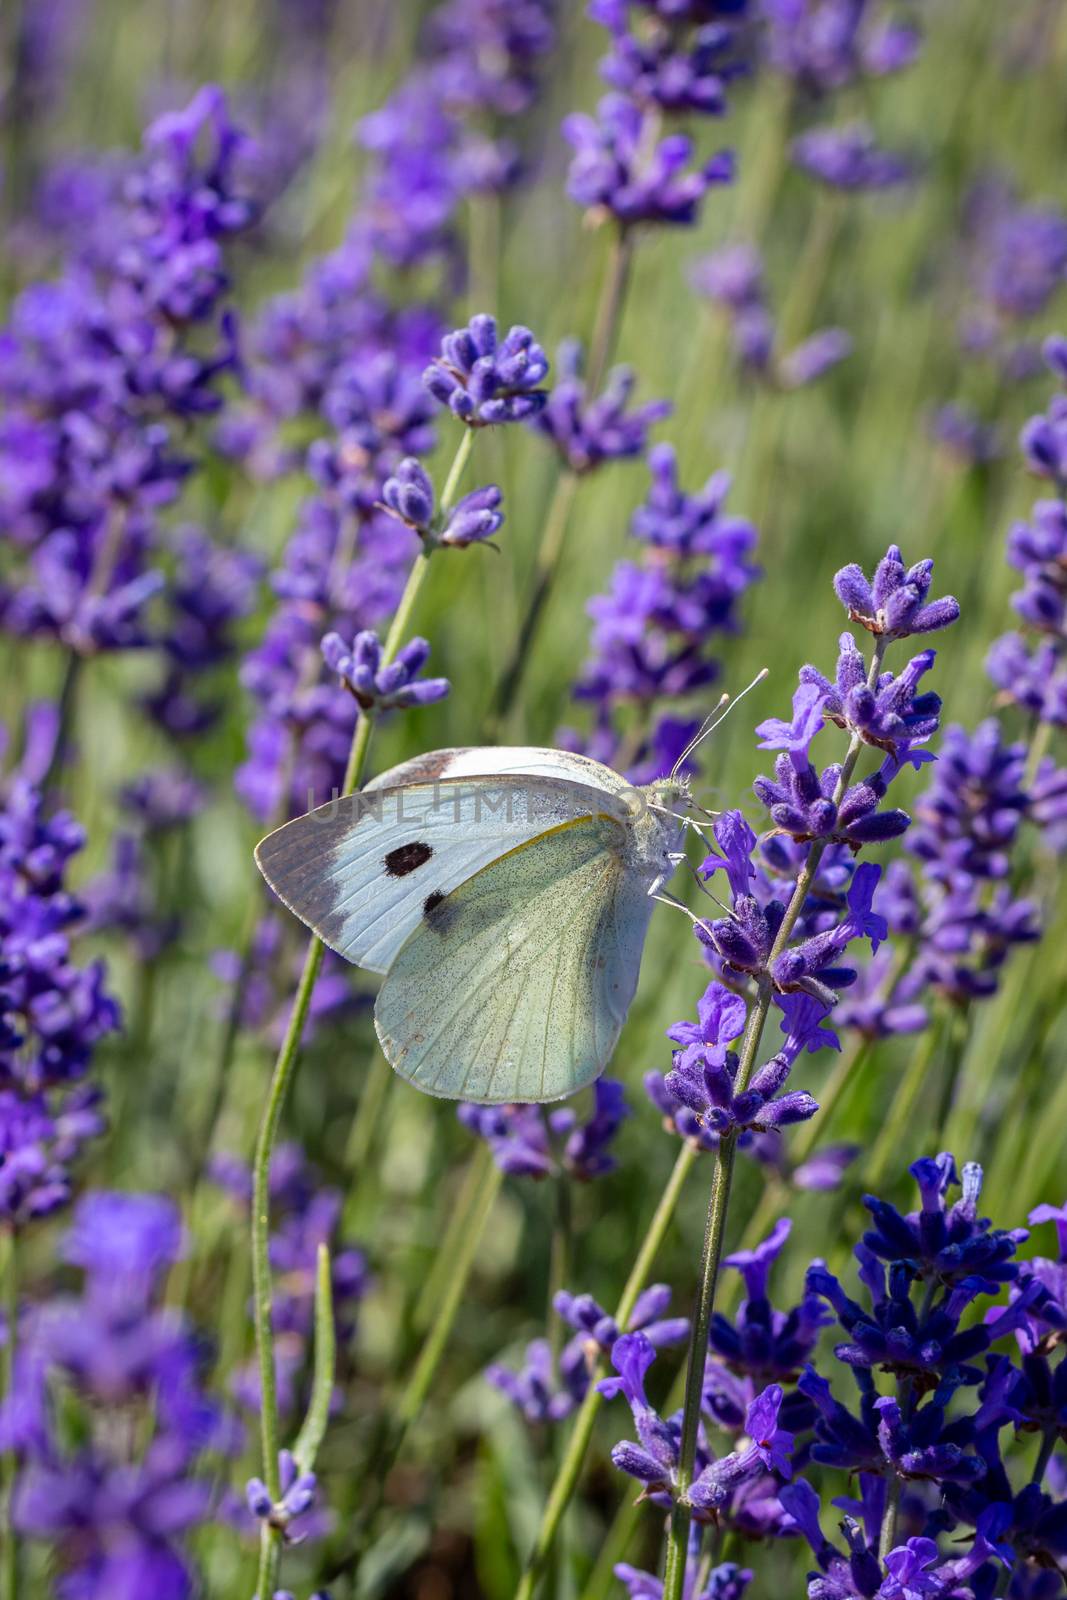 Cabbage White Buterfly (Pieris brassicae) resting on a lavender flower